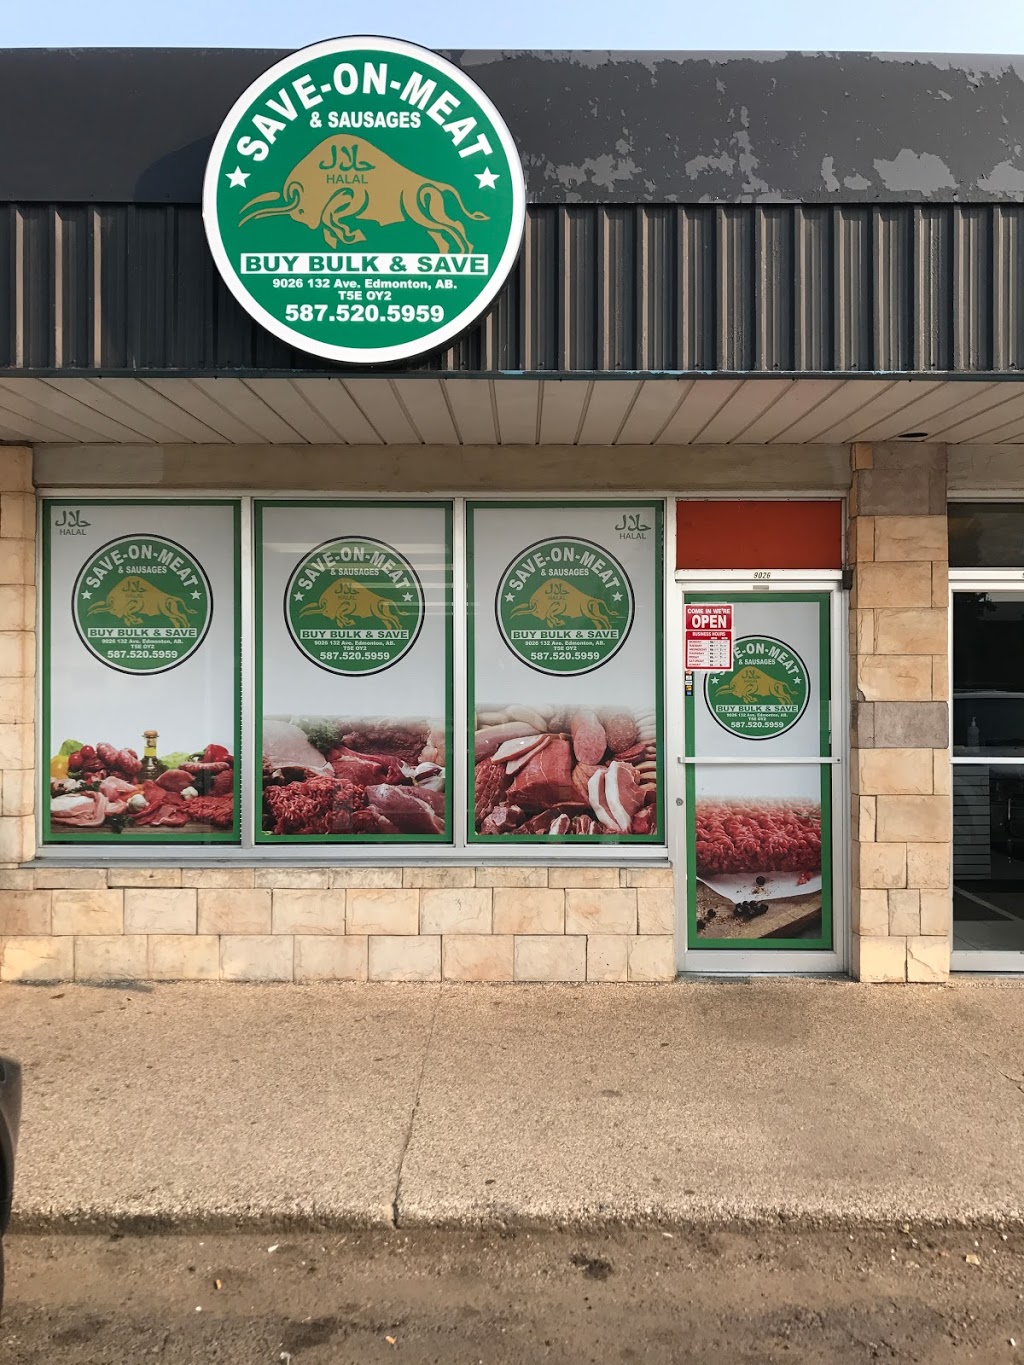 Save on Meat | store | 9026 132 Ave NW, Edmonton, AB T5E 0Y2, Canada | 5875205959 OR +1 587-520-5959